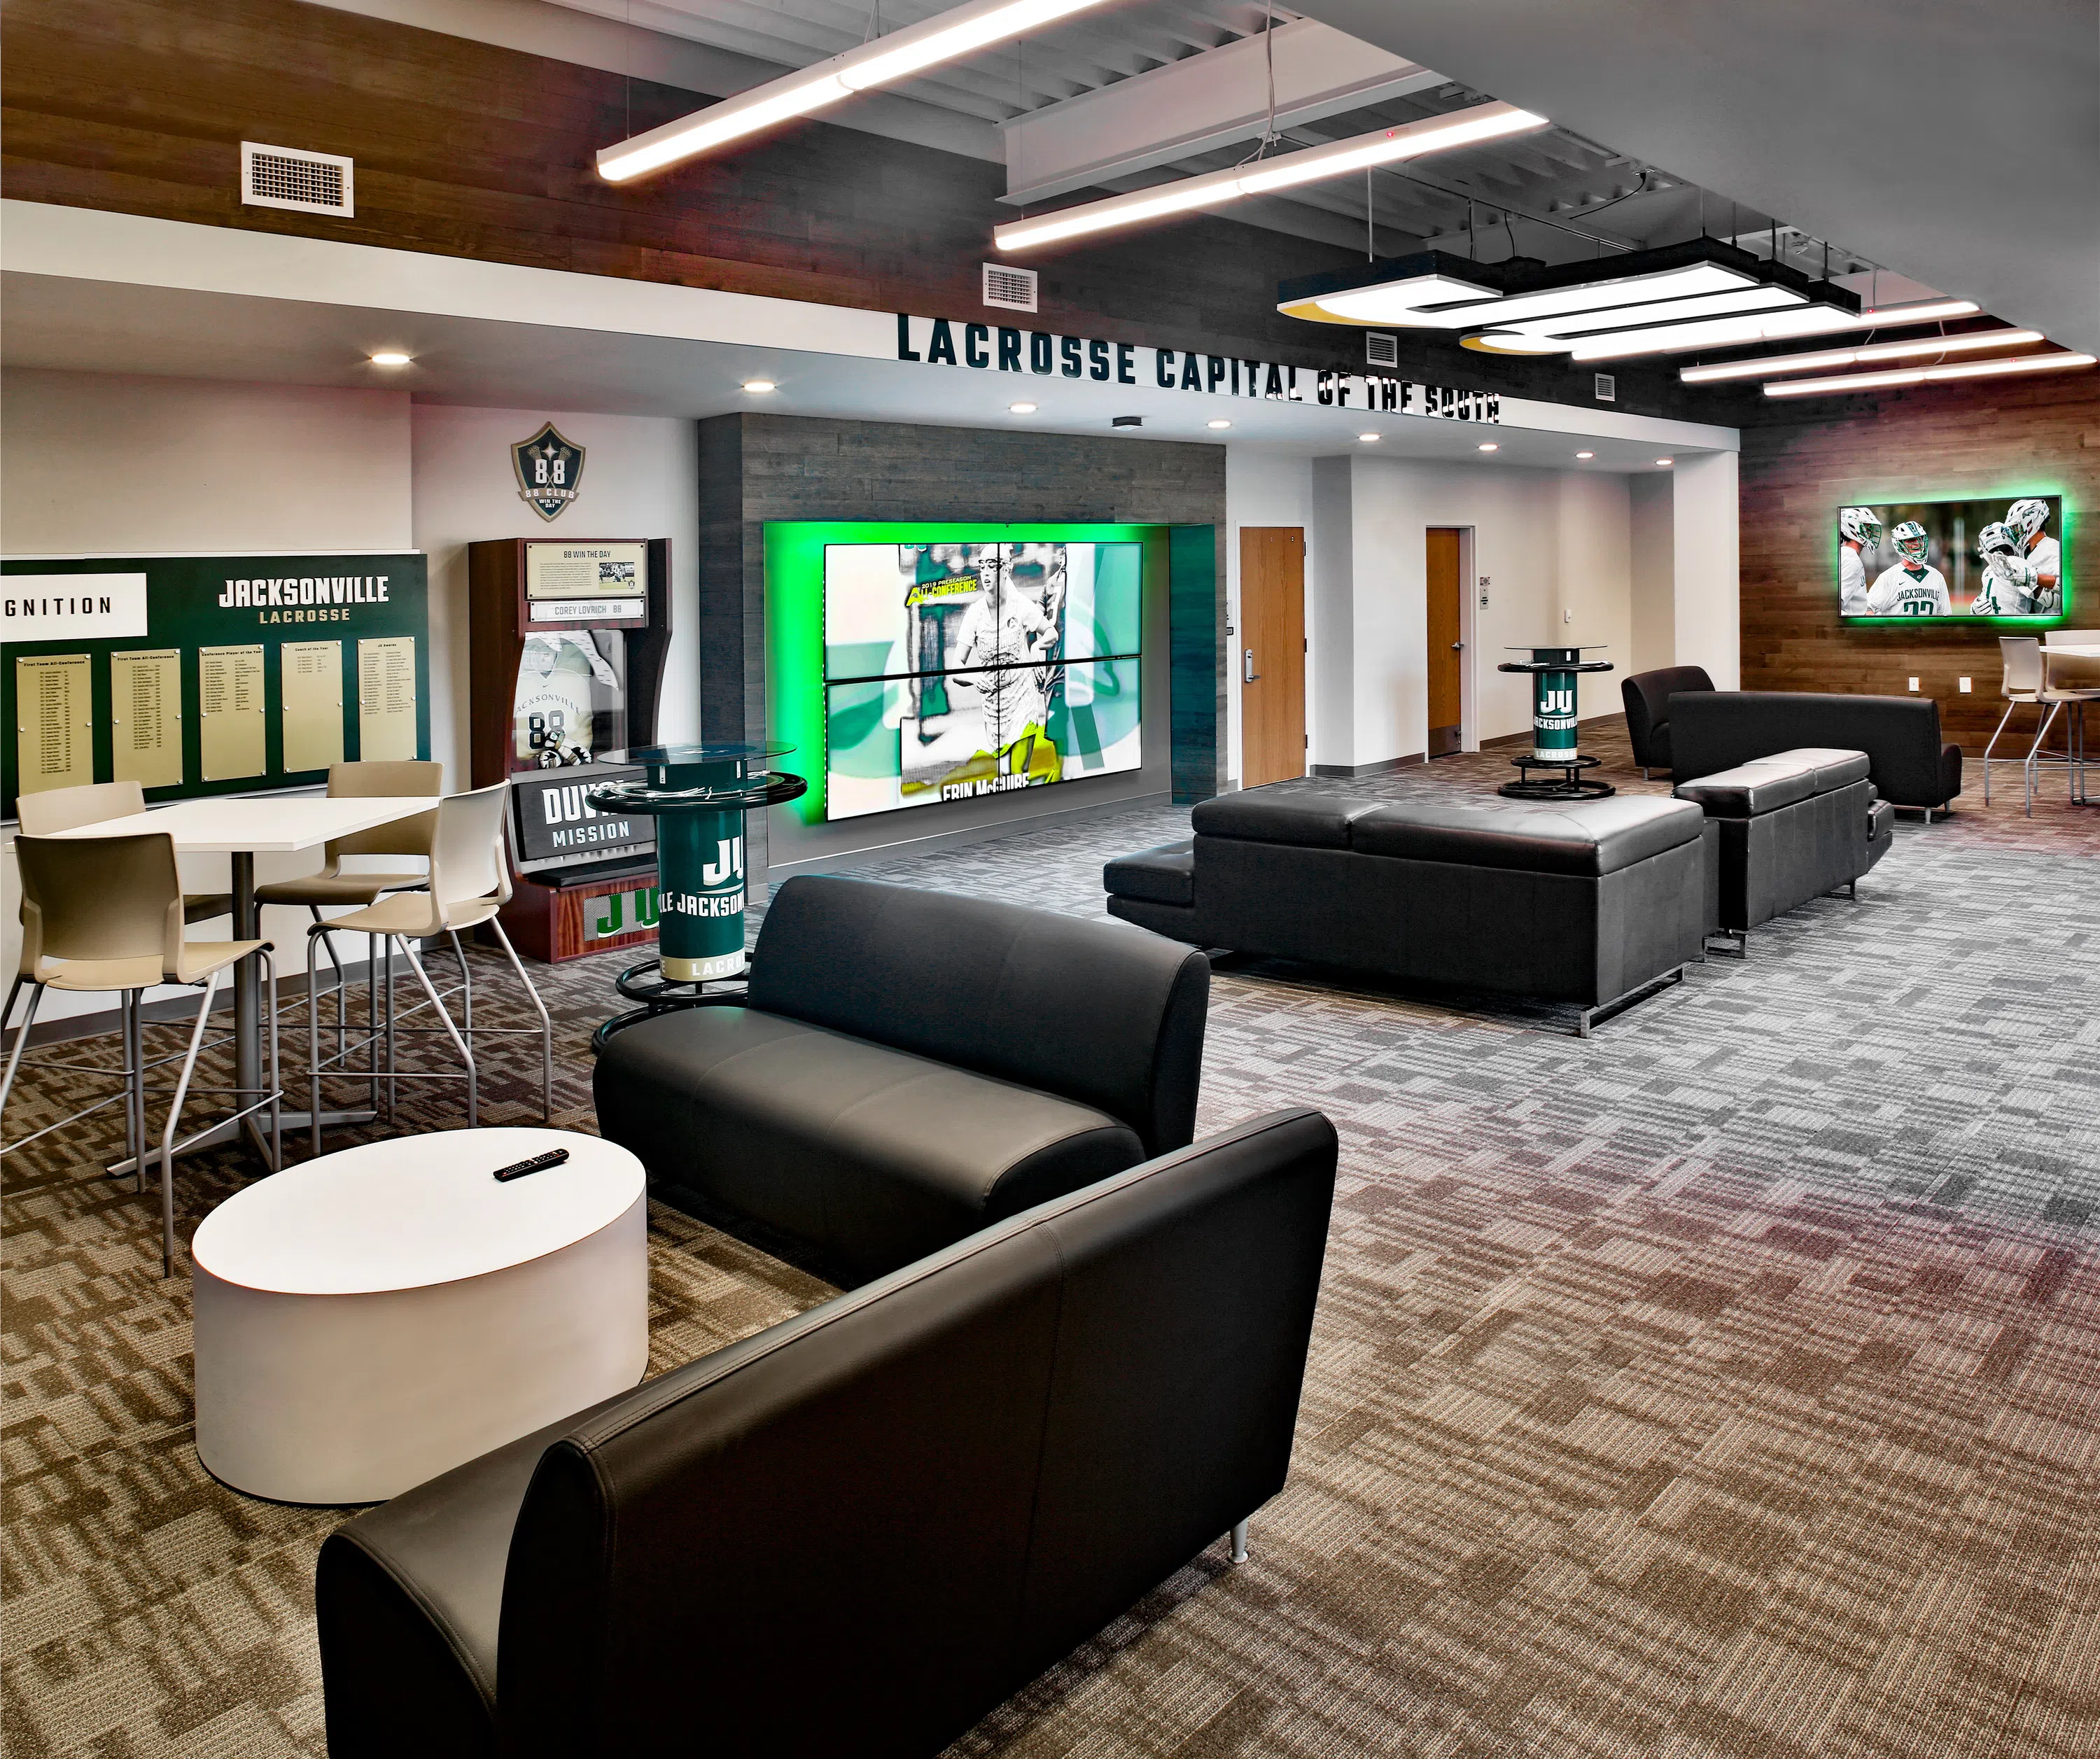 This is the main lobby of the Rock Lacrosse Center. 